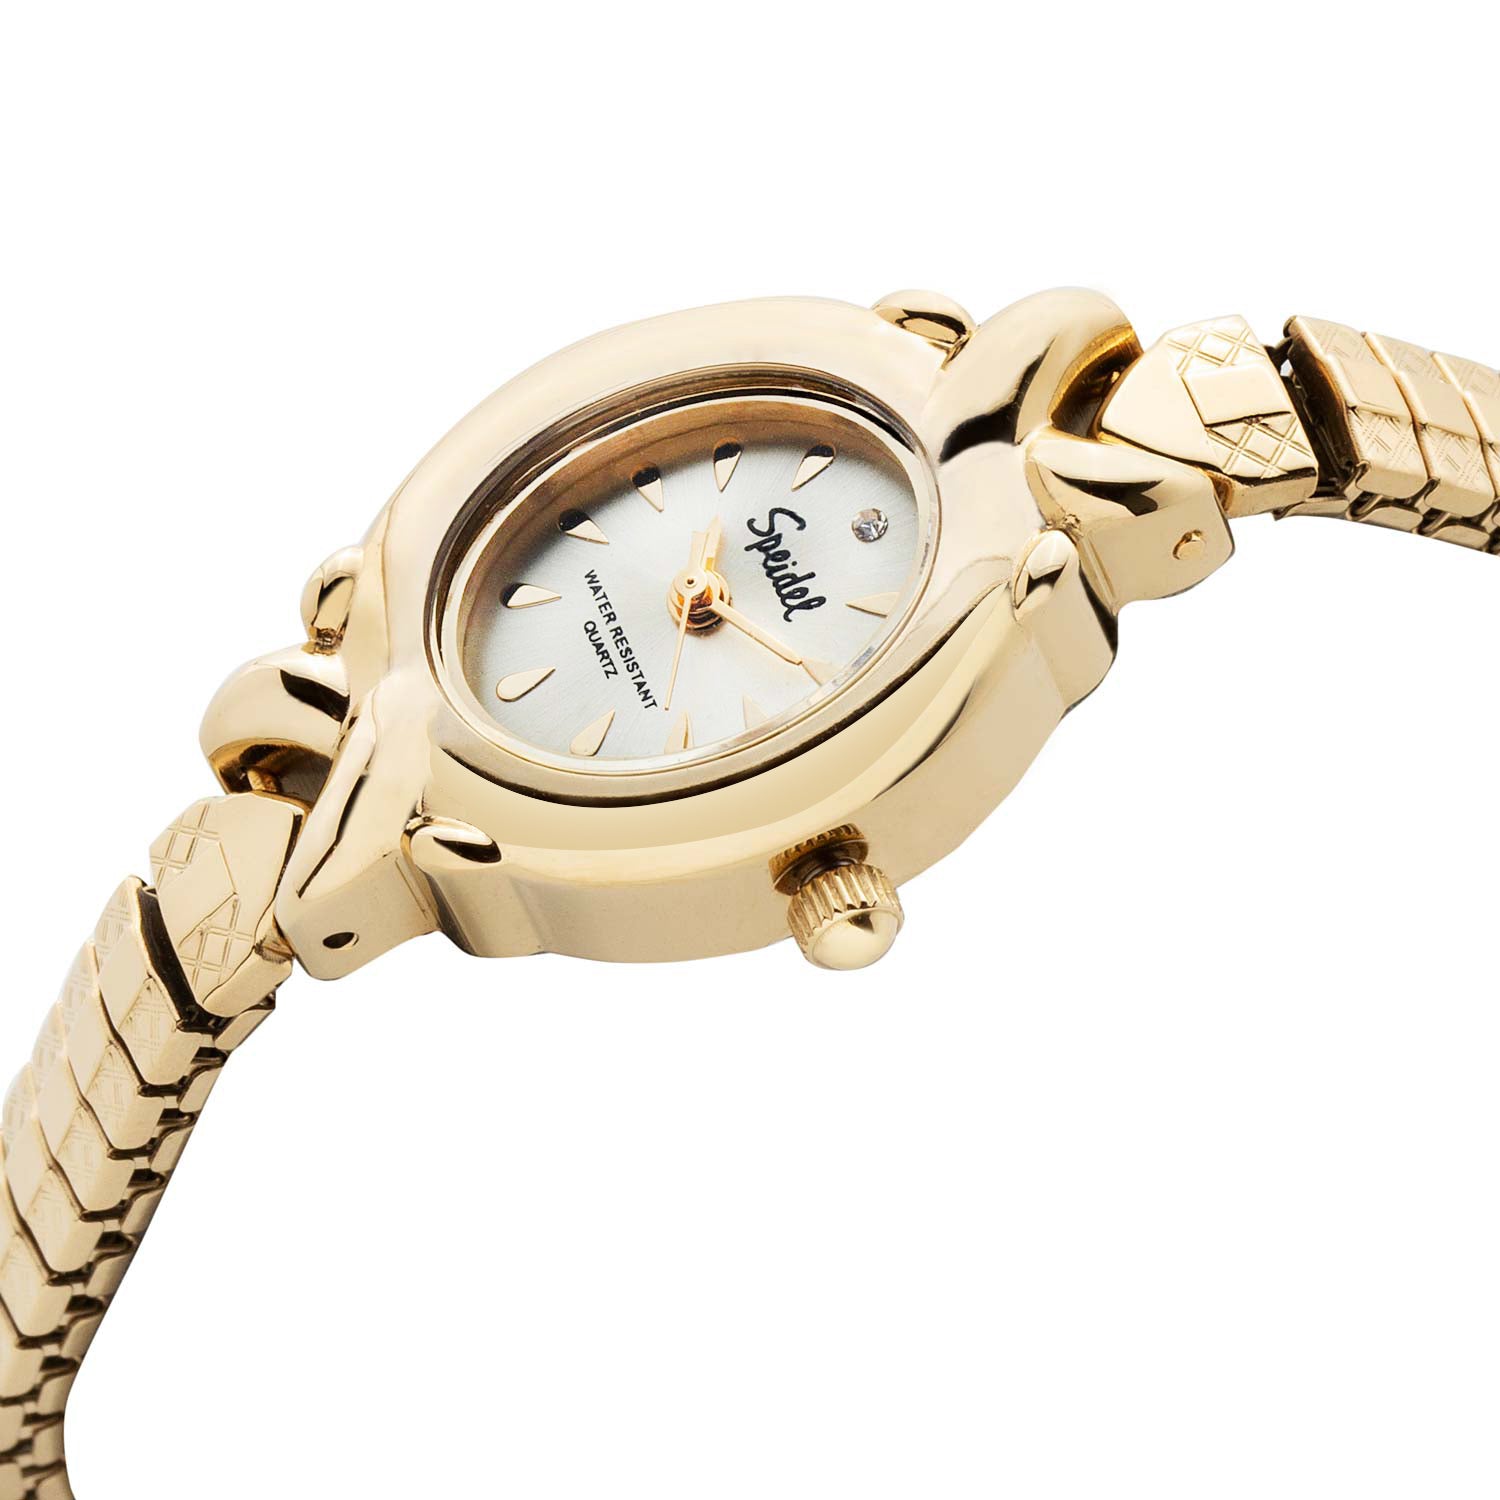 Women's Watch With Twist-O-Flex Watch, Gold And Silver Tone Expansion Band  | Speidel